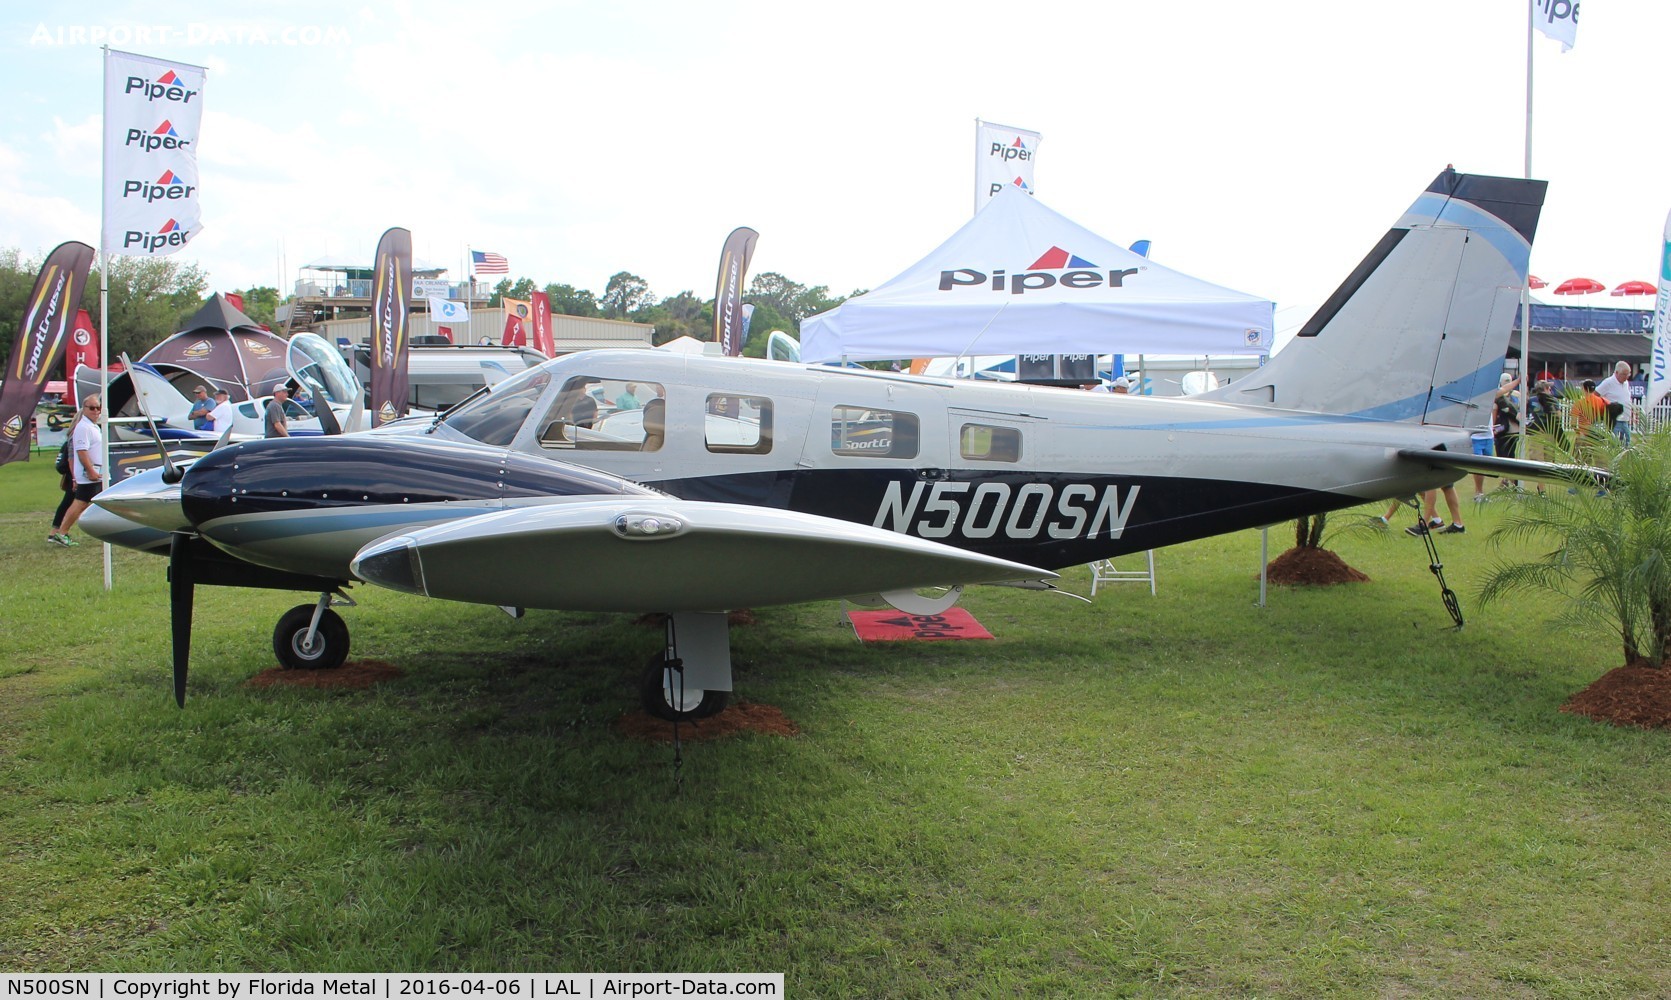 N500SN, 2014 Piper PA-34-220T C/N 3449500, Got a repaint in 2016 before being exported to Brazil